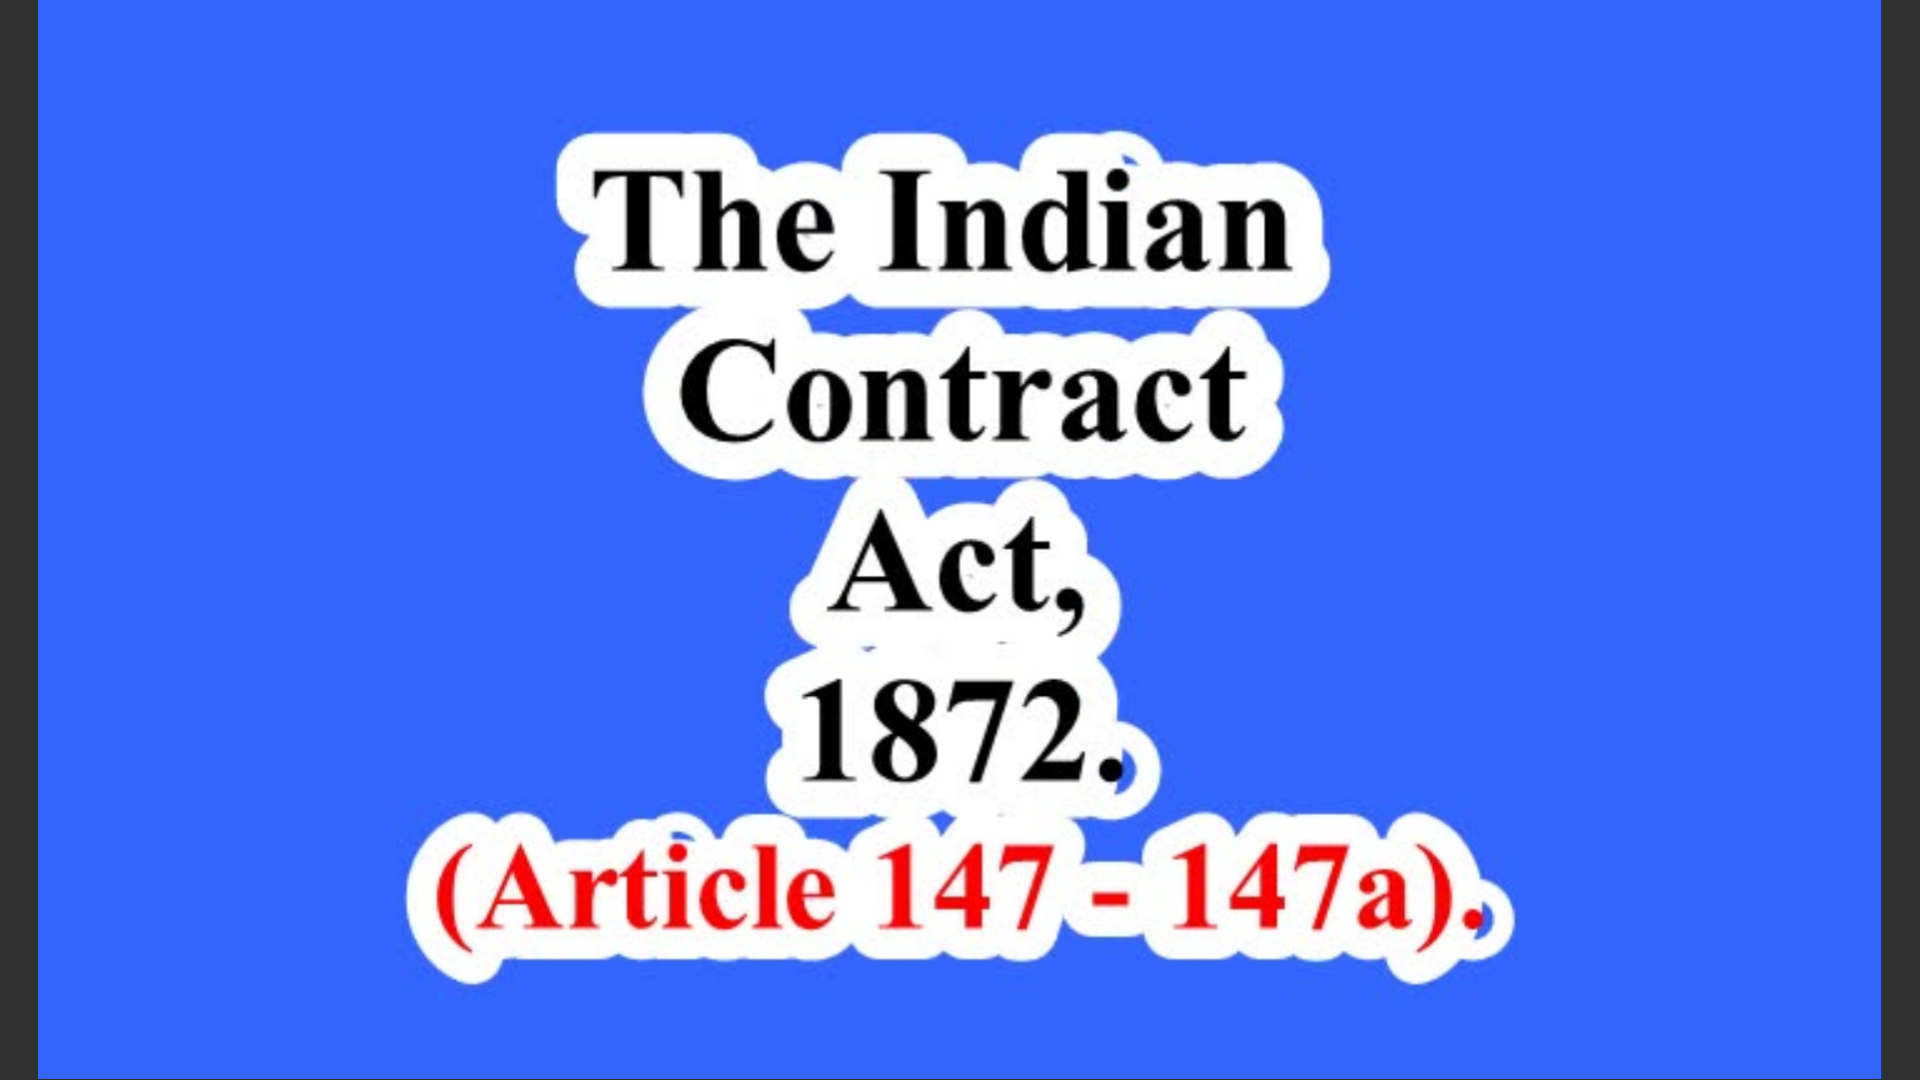 The Indian Contract Act, 1872. (Article 147 – 147a).